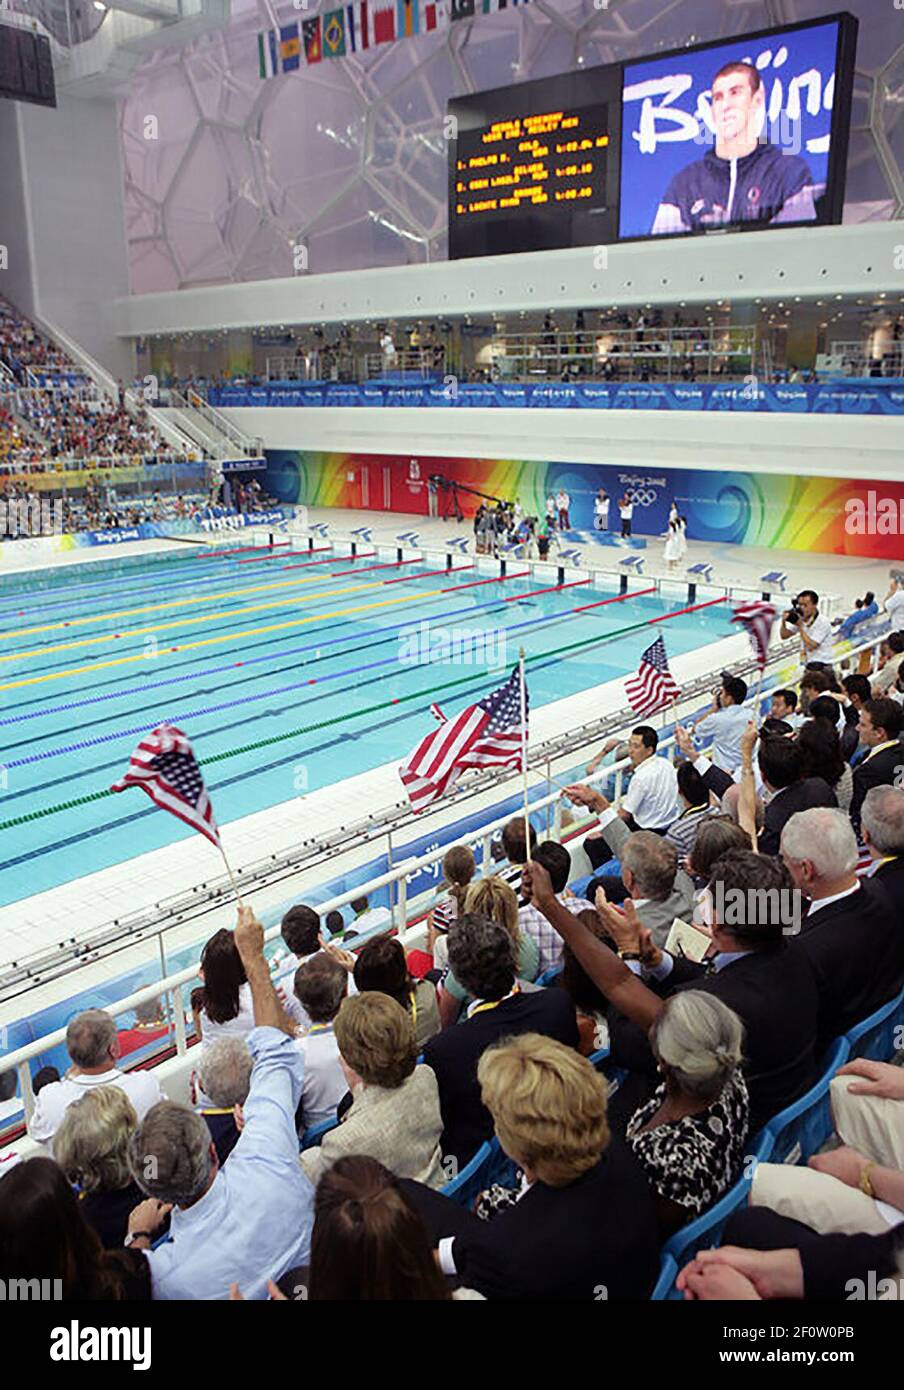 President George W. Bush waves an American flag as U.S. swimmer Michael Phelps is presented his gold medal after winning the 400-meter Individual Medley Sunday Aug. 10 2008 at the 2008 Summer Olympics in Beijing. Stock Photo